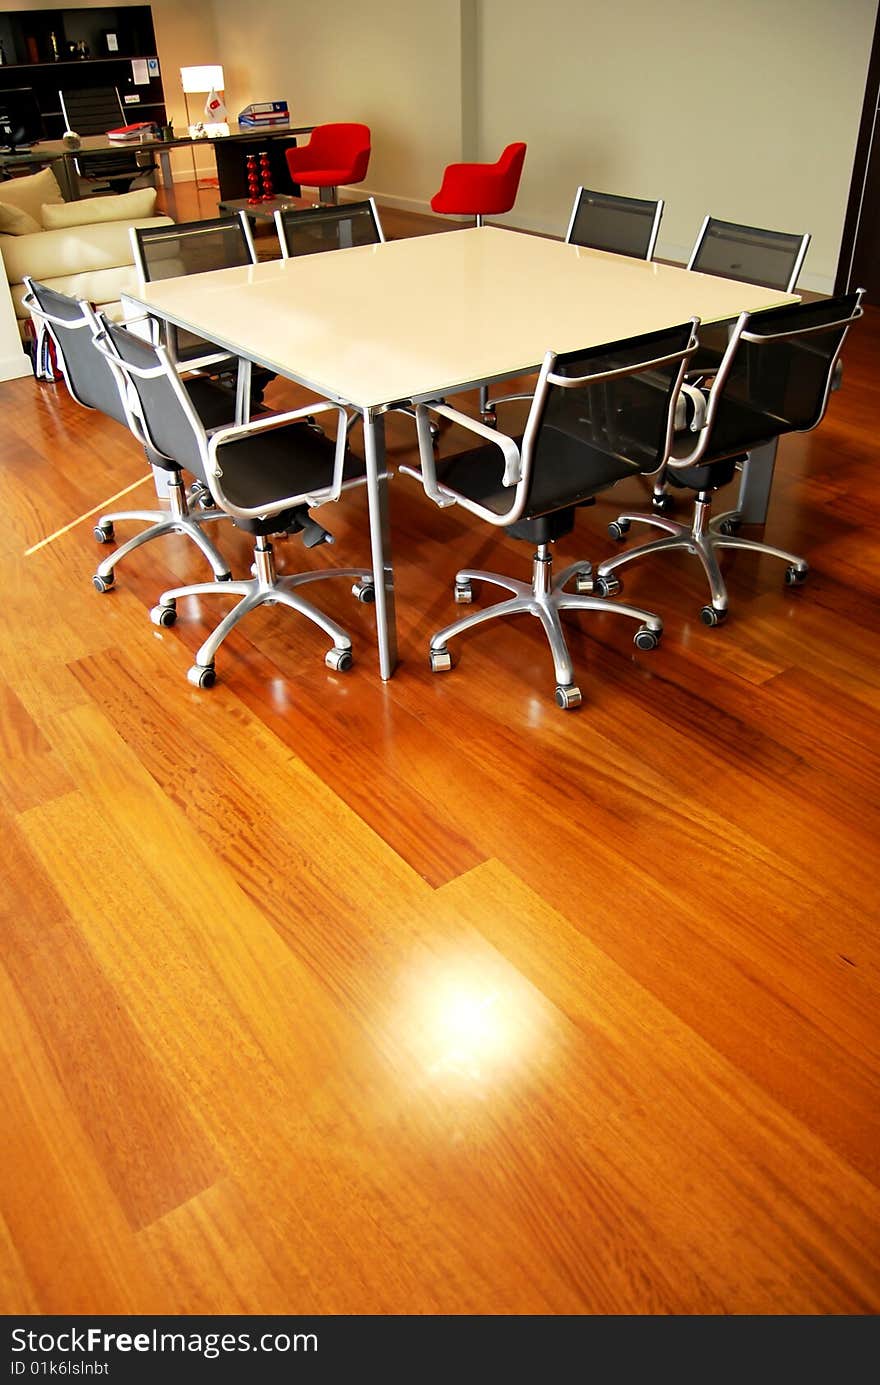 Istanbul Furtrans holding, small conference table. Istanbul Furtrans holding, small conference table